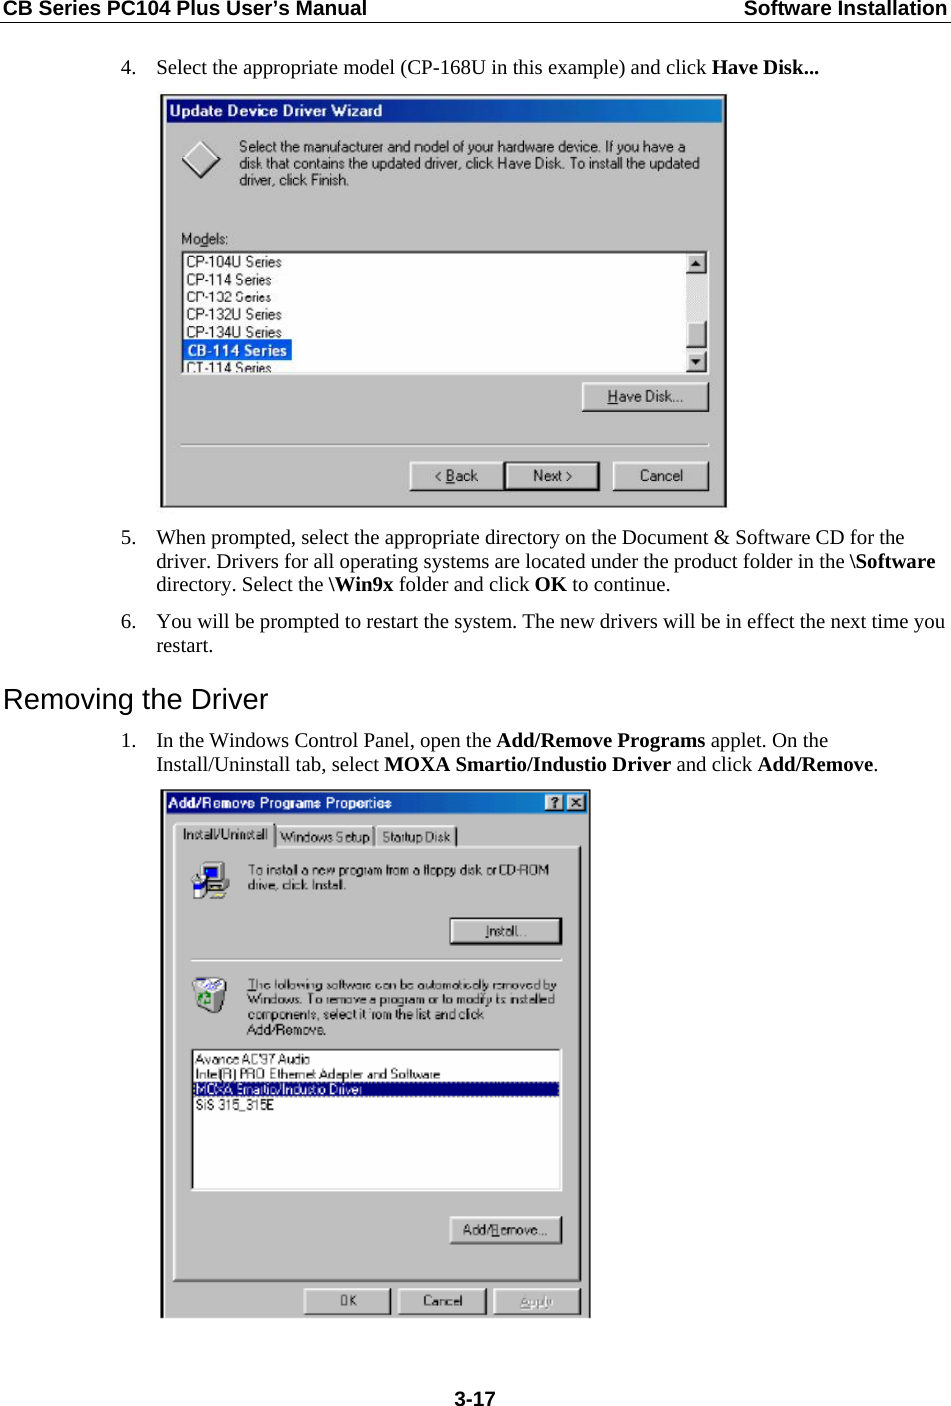 CB Series PC104 Plus User’s Manual  Software Installation 4. Select the appropriate model (CP-168U in this example) and click Have Disk...  5. When prompted, select the appropriate directory on the Document &amp; Software CD for the driver. Drivers for all operating systems are located under the product folder in the \Software directory. Select the \Win9x folder and click OK to continue. 6. You will be prompted to restart the system. The new drivers will be in effect the next time you restart. Removing the Driver 1. In the Windows Control Panel, open the Add/Remove Programs applet. On the Install/Uninstall tab, select MOXA Smartio/Industio Driver and click Add/Remove.   3-17